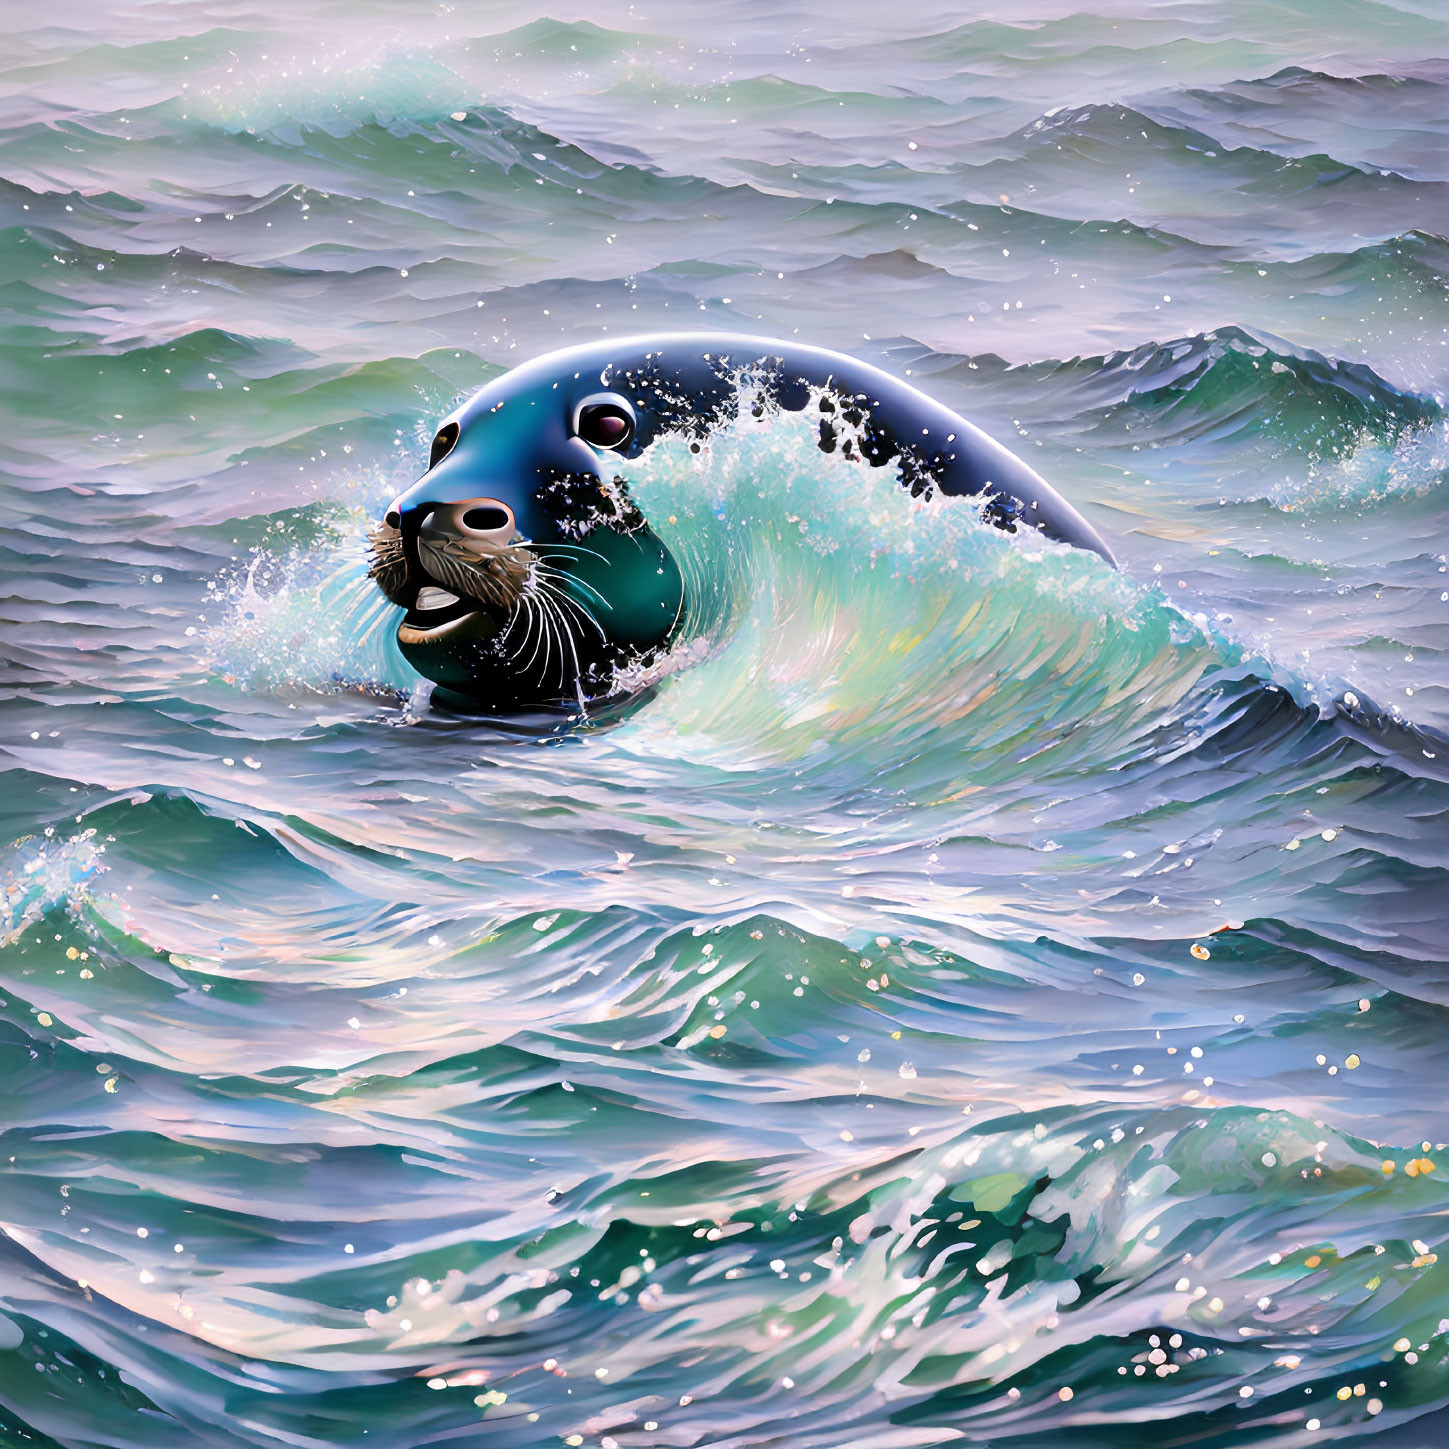 Seal emerging from wave with whiskered face, playful motion in water